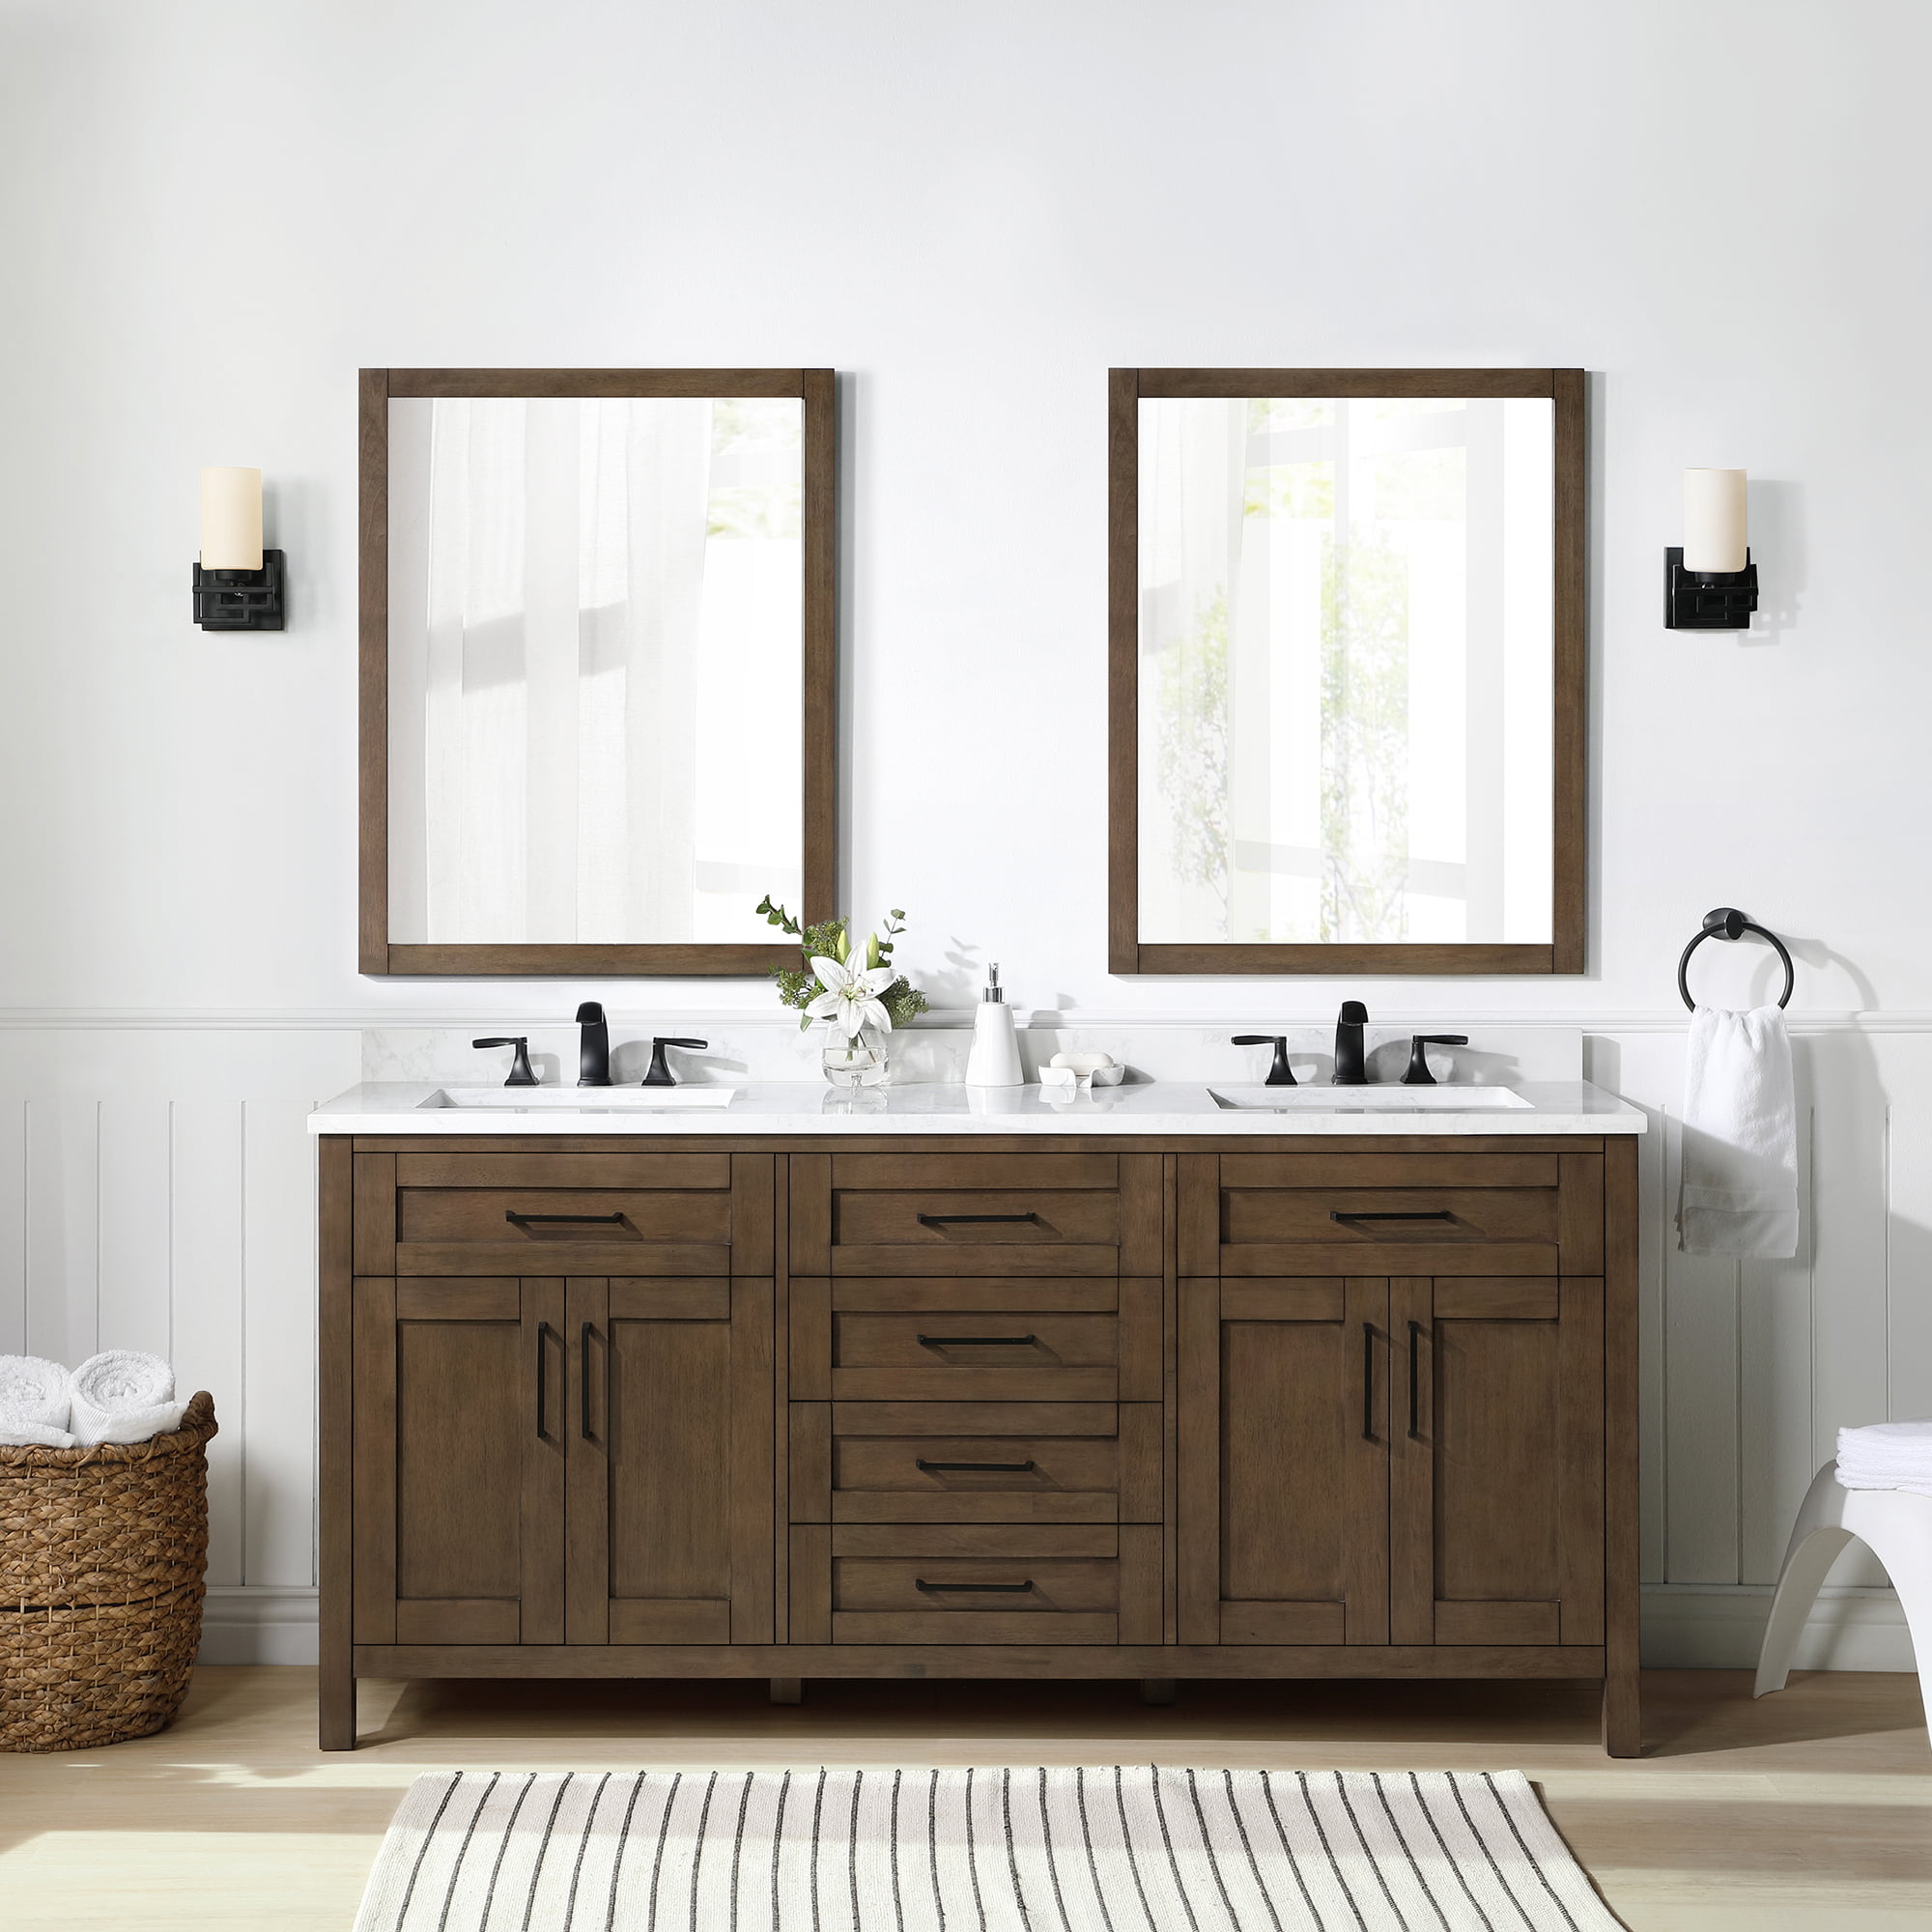 OVE Decors Tahoe 72 in. Almond Latte Vanity with 2 Mirrors included ...